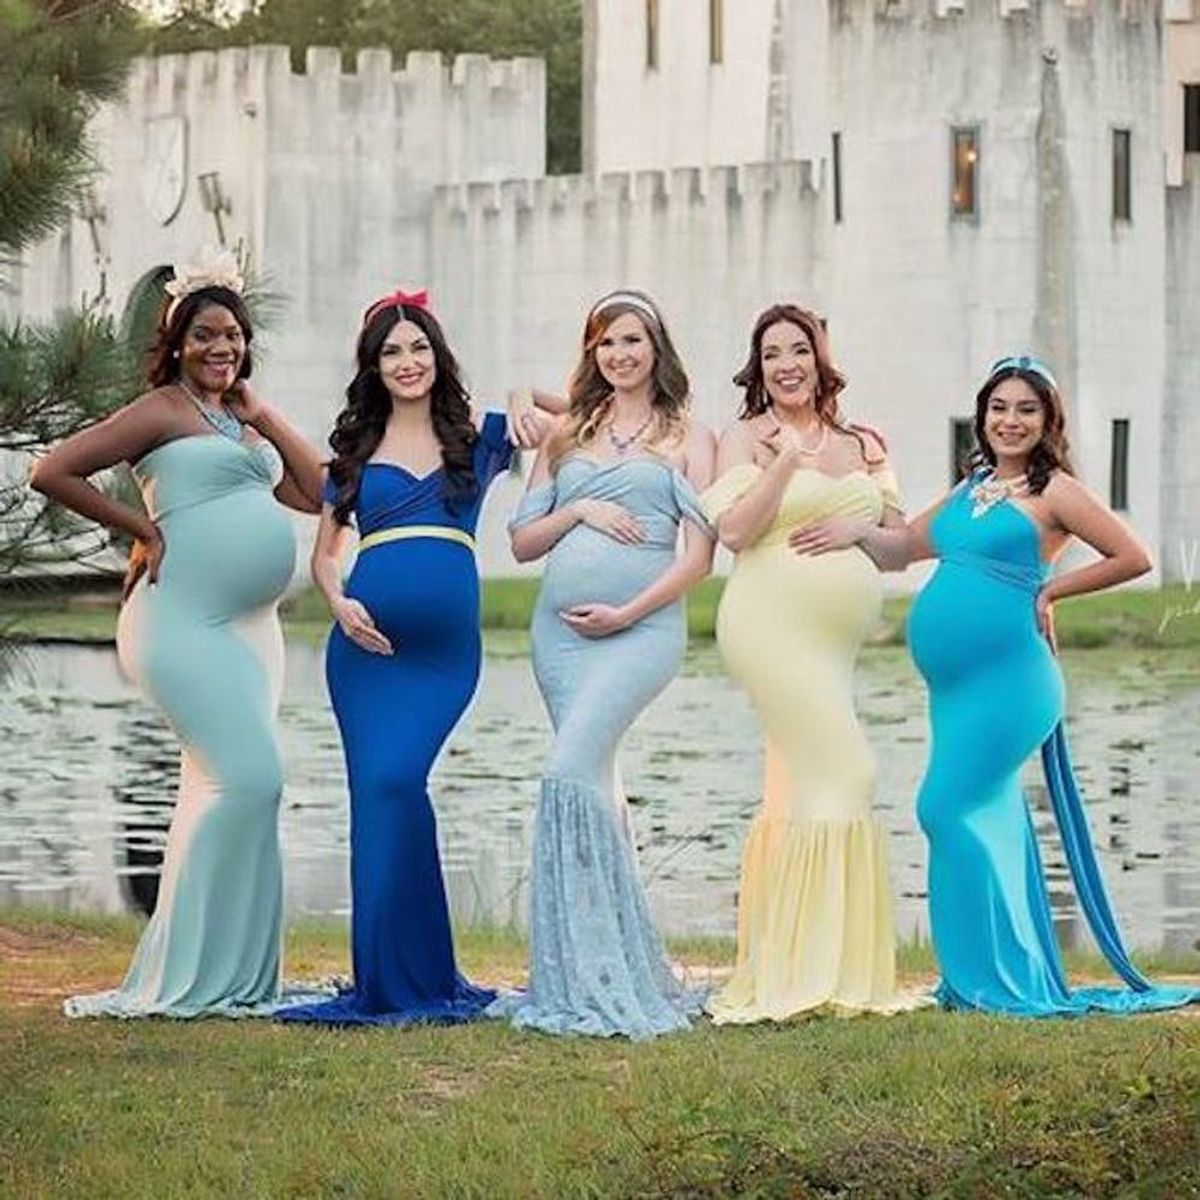 You Can Now Book a Disney Princess-Inspired Maternity Shoot